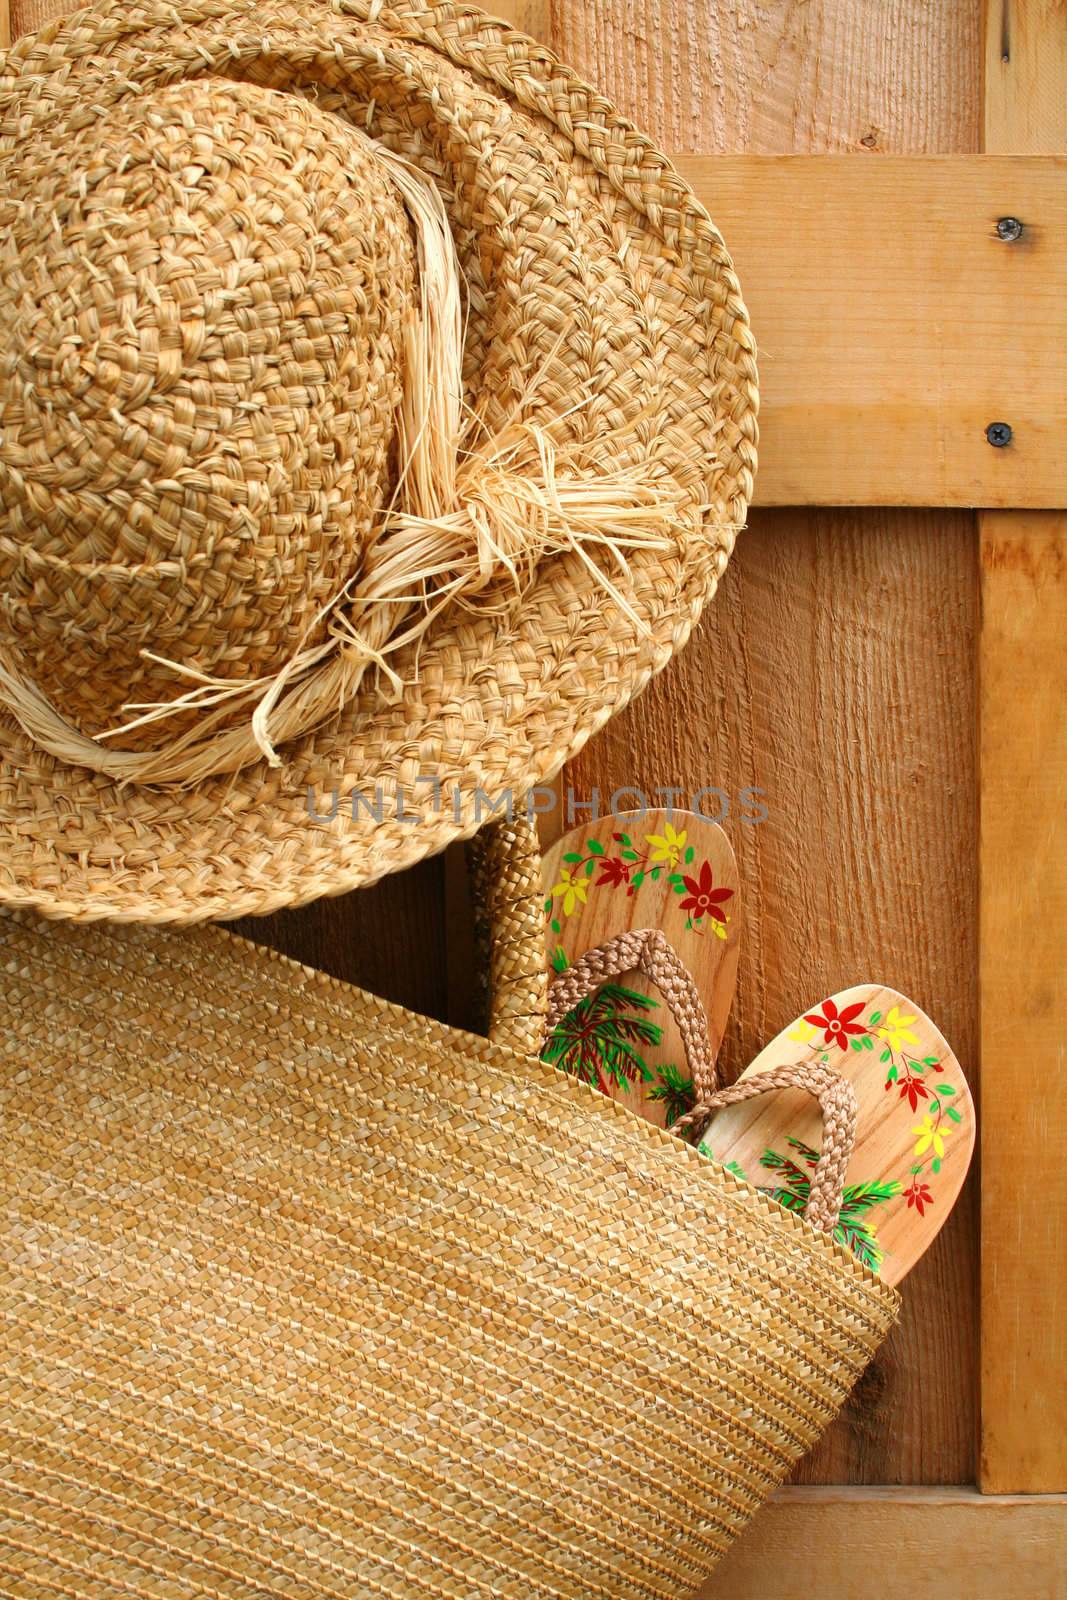 Pair of sandals hanging out of wicker purse with sun hat